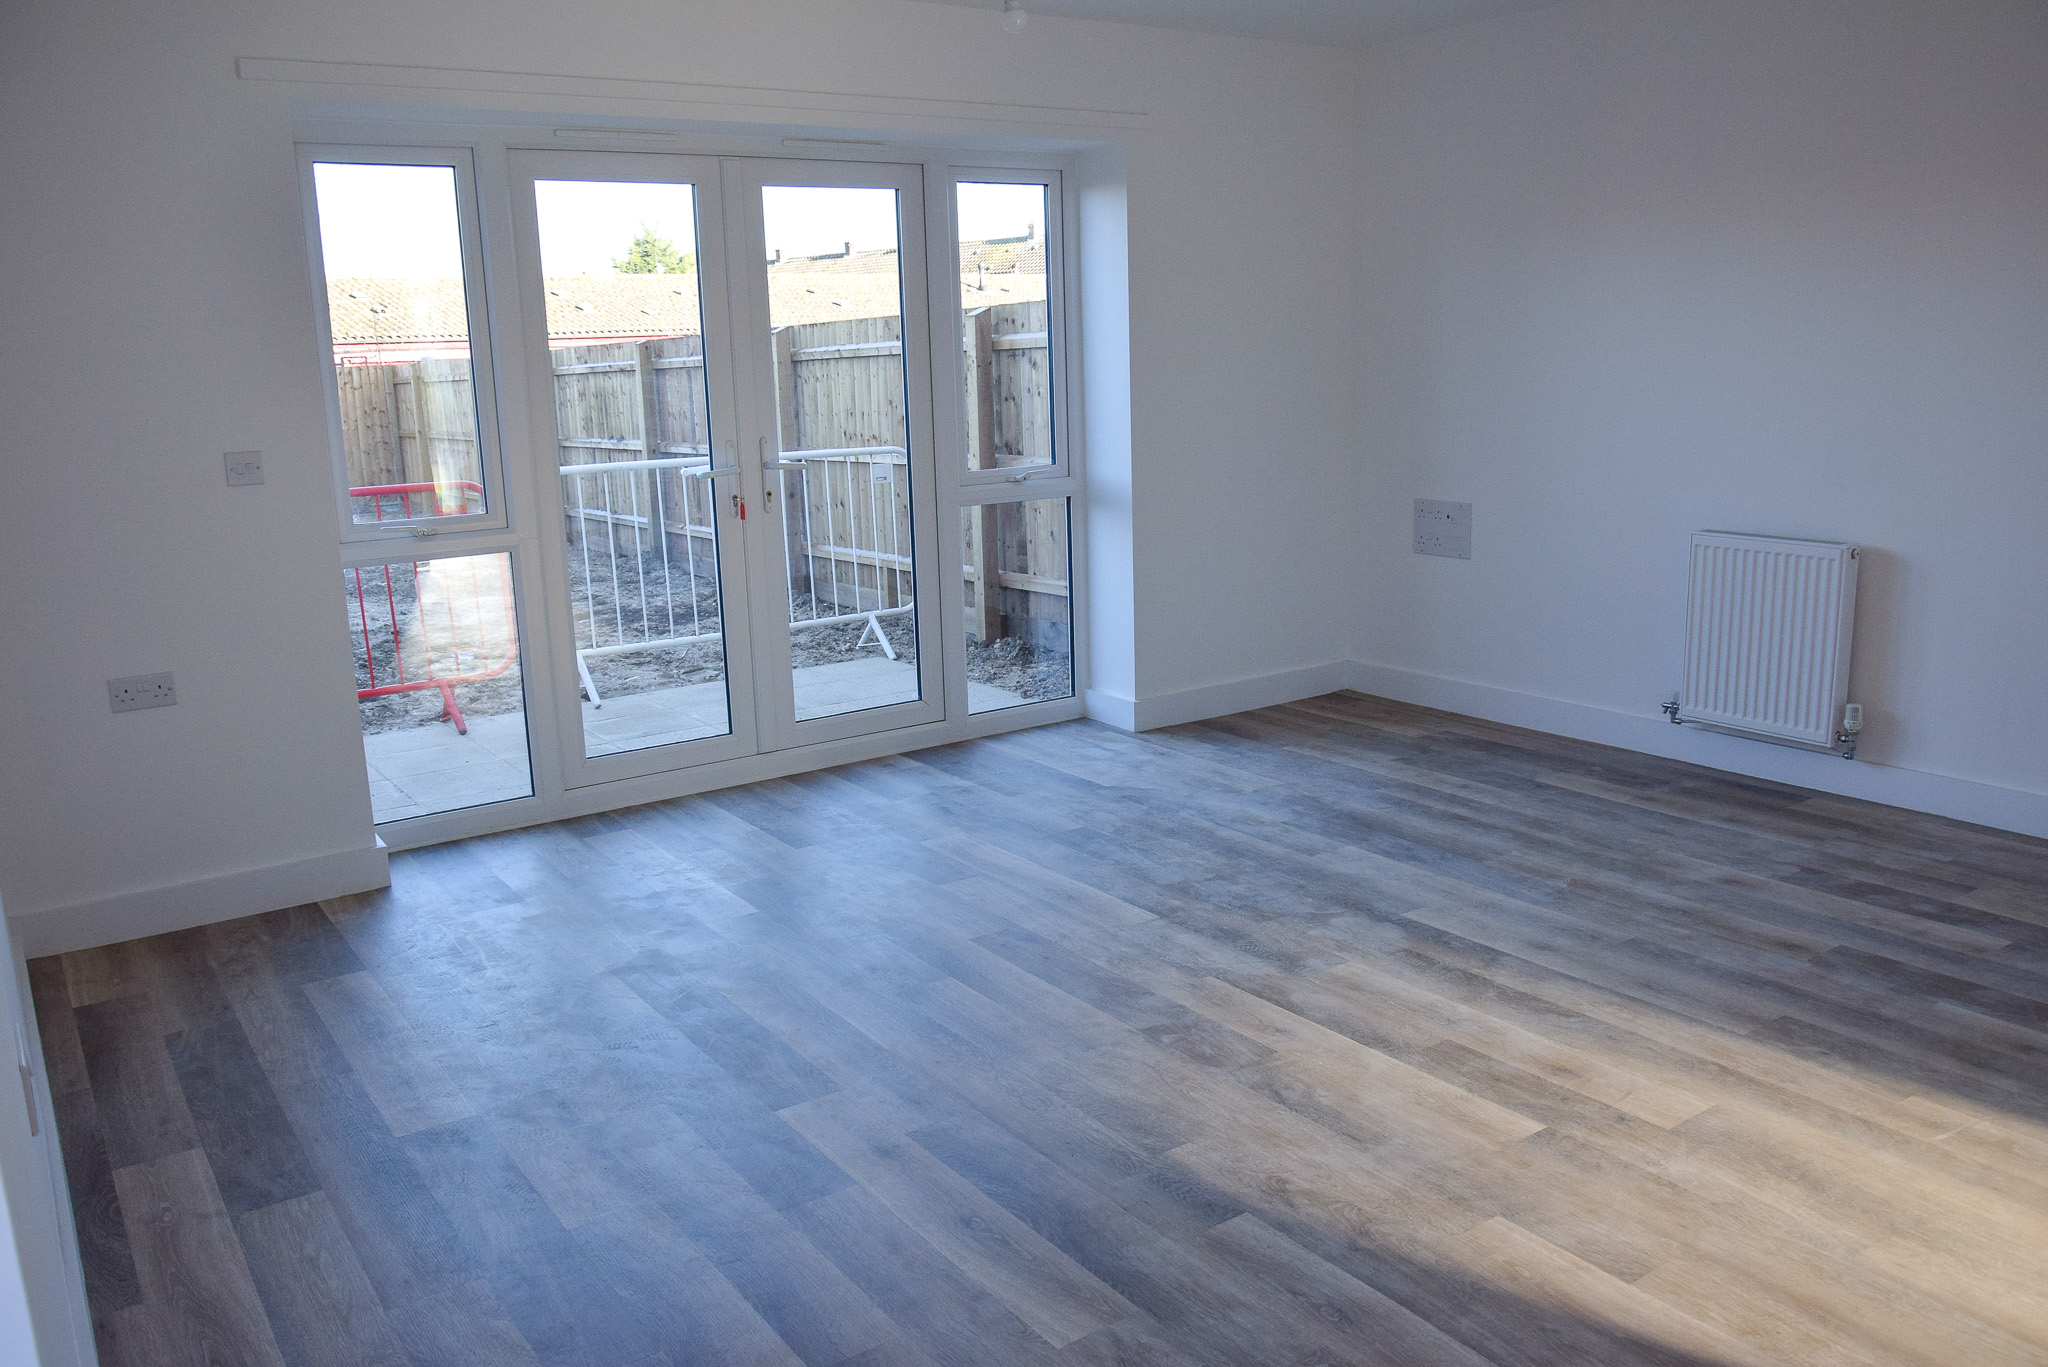 Inside one of the new properties at Salters Road. Photo courtesy of BCKLWN